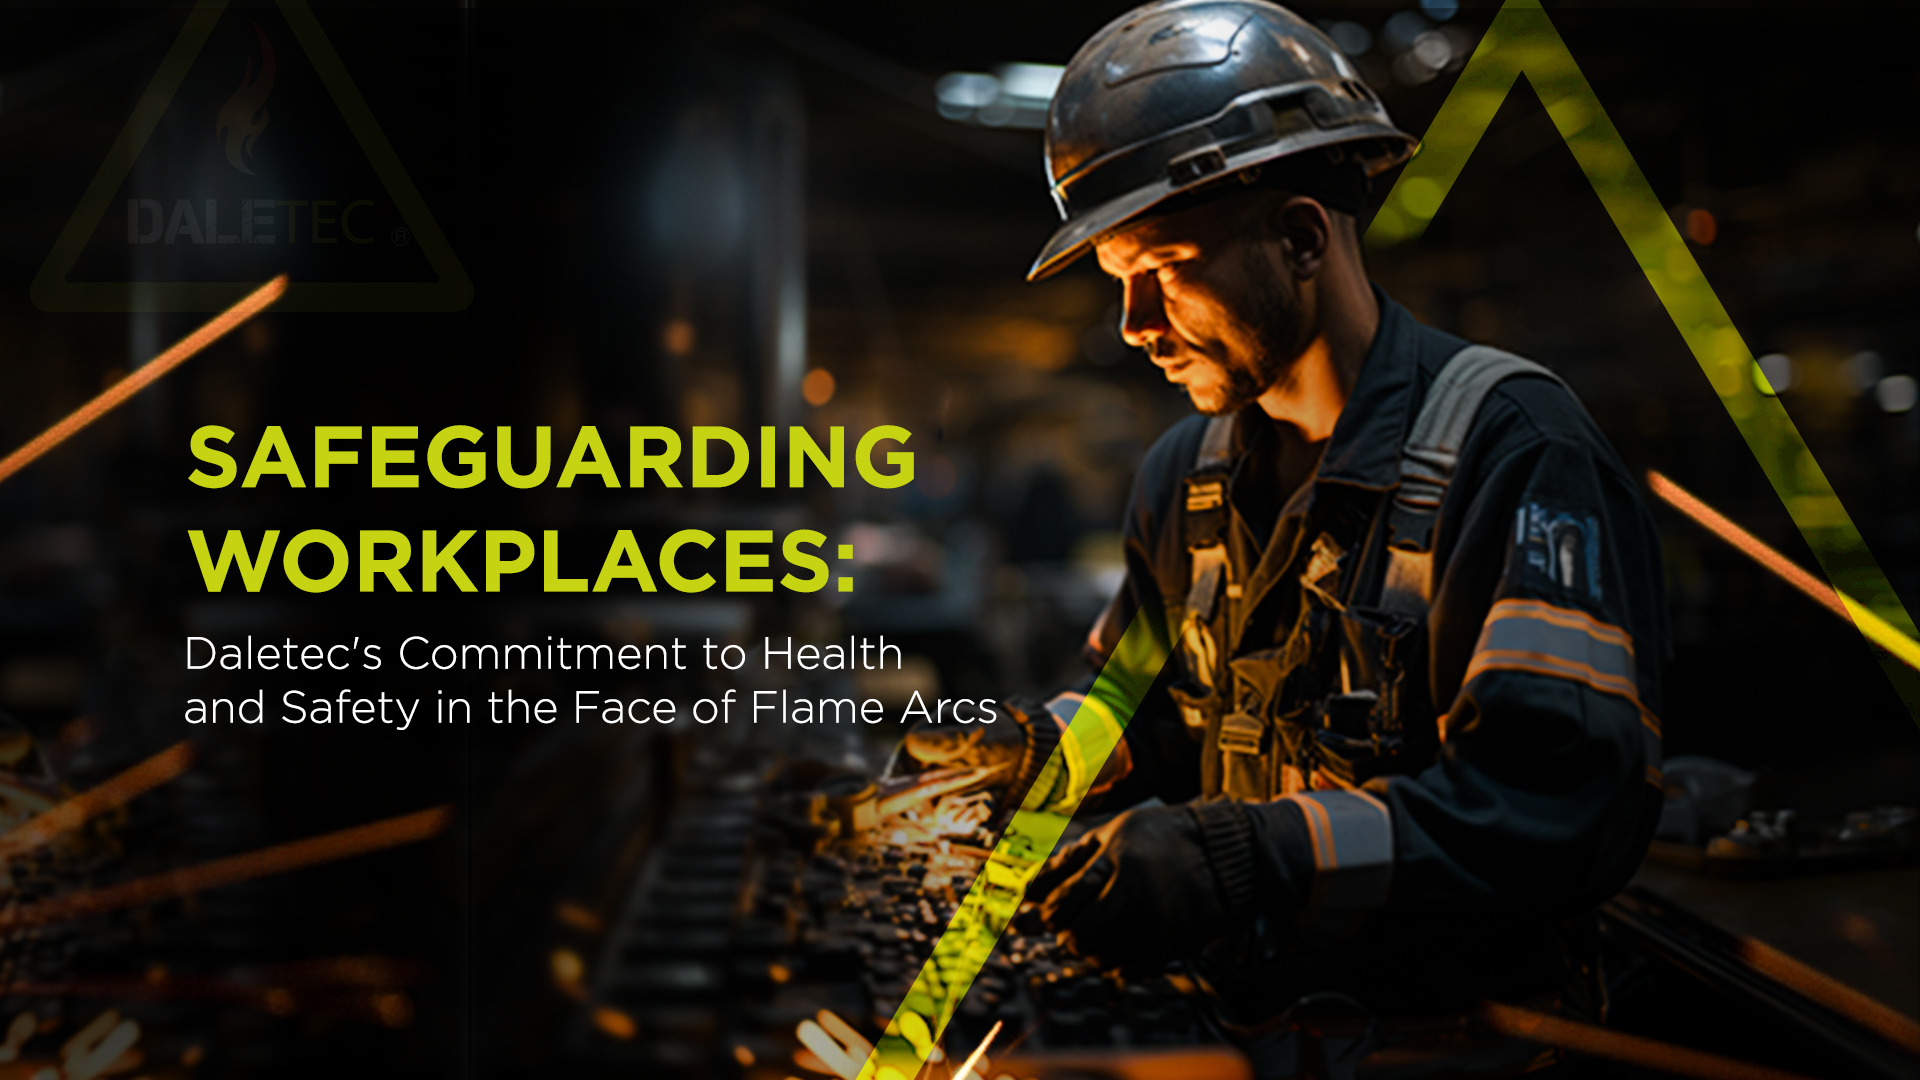 Safeguarding Workplaces: Daletec’s Commitment to Health and Safety in the Face of Flame Arcs